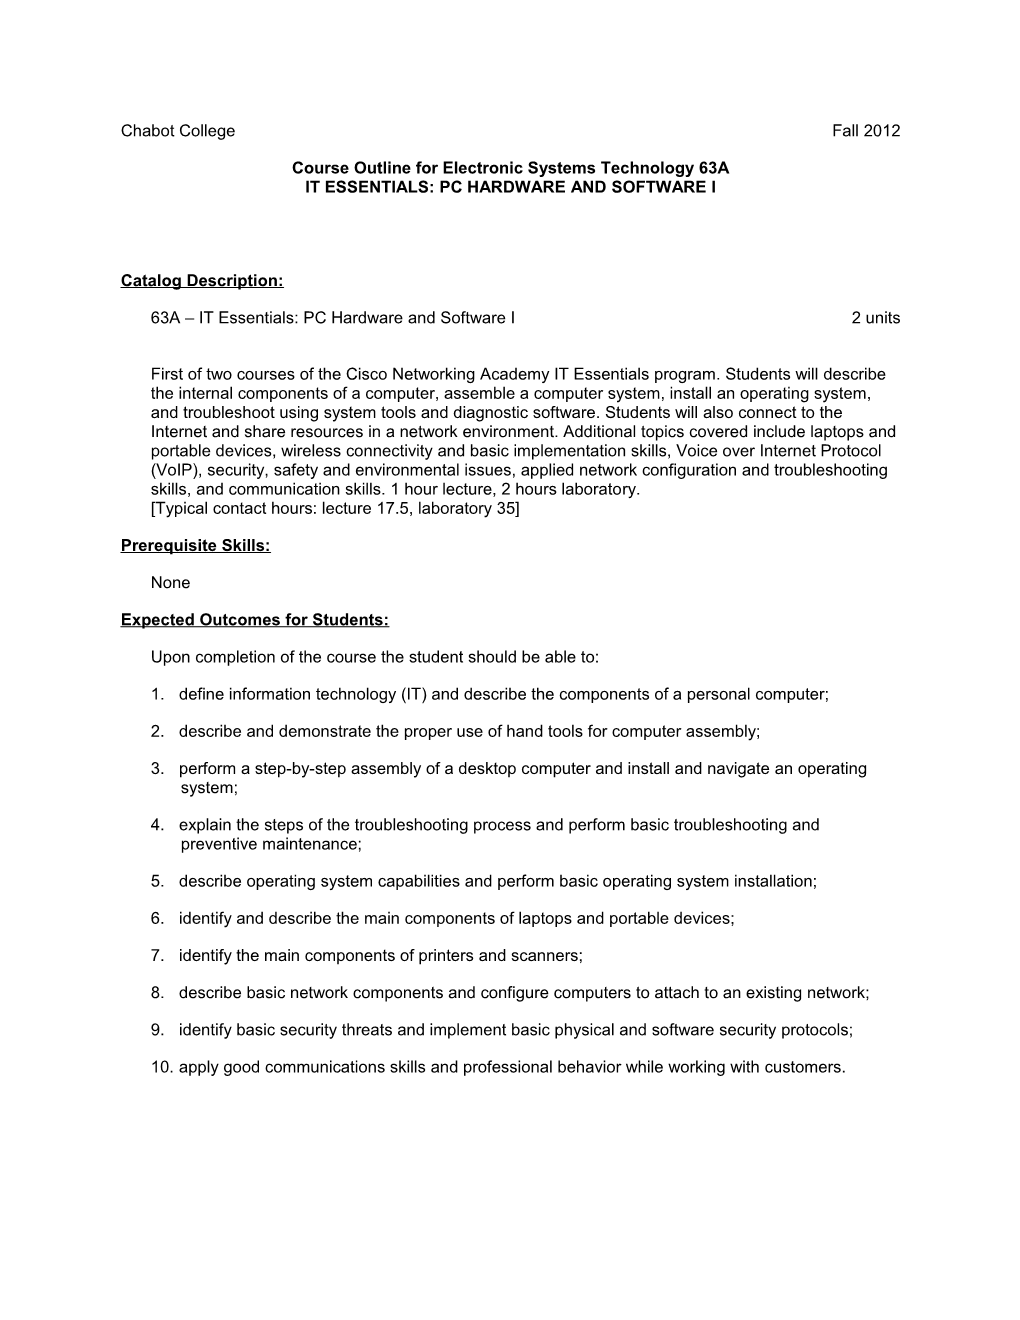 Course Outline for Electronic Systems Technology 63A